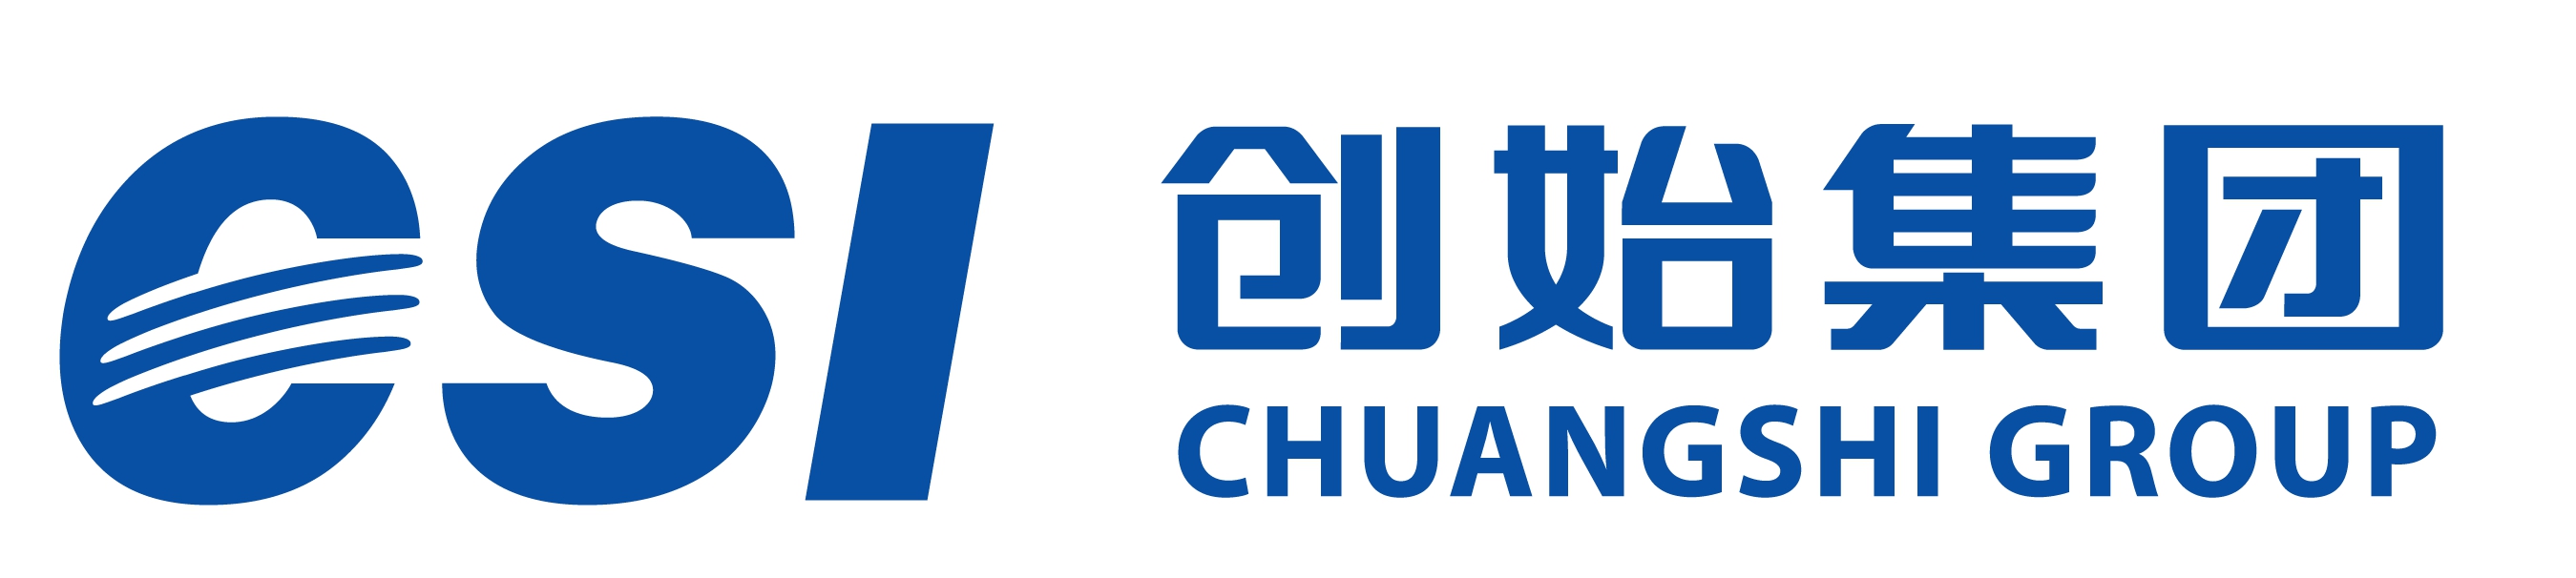 SHANGHAI CHUANGSHI INDUSTRY GROUP